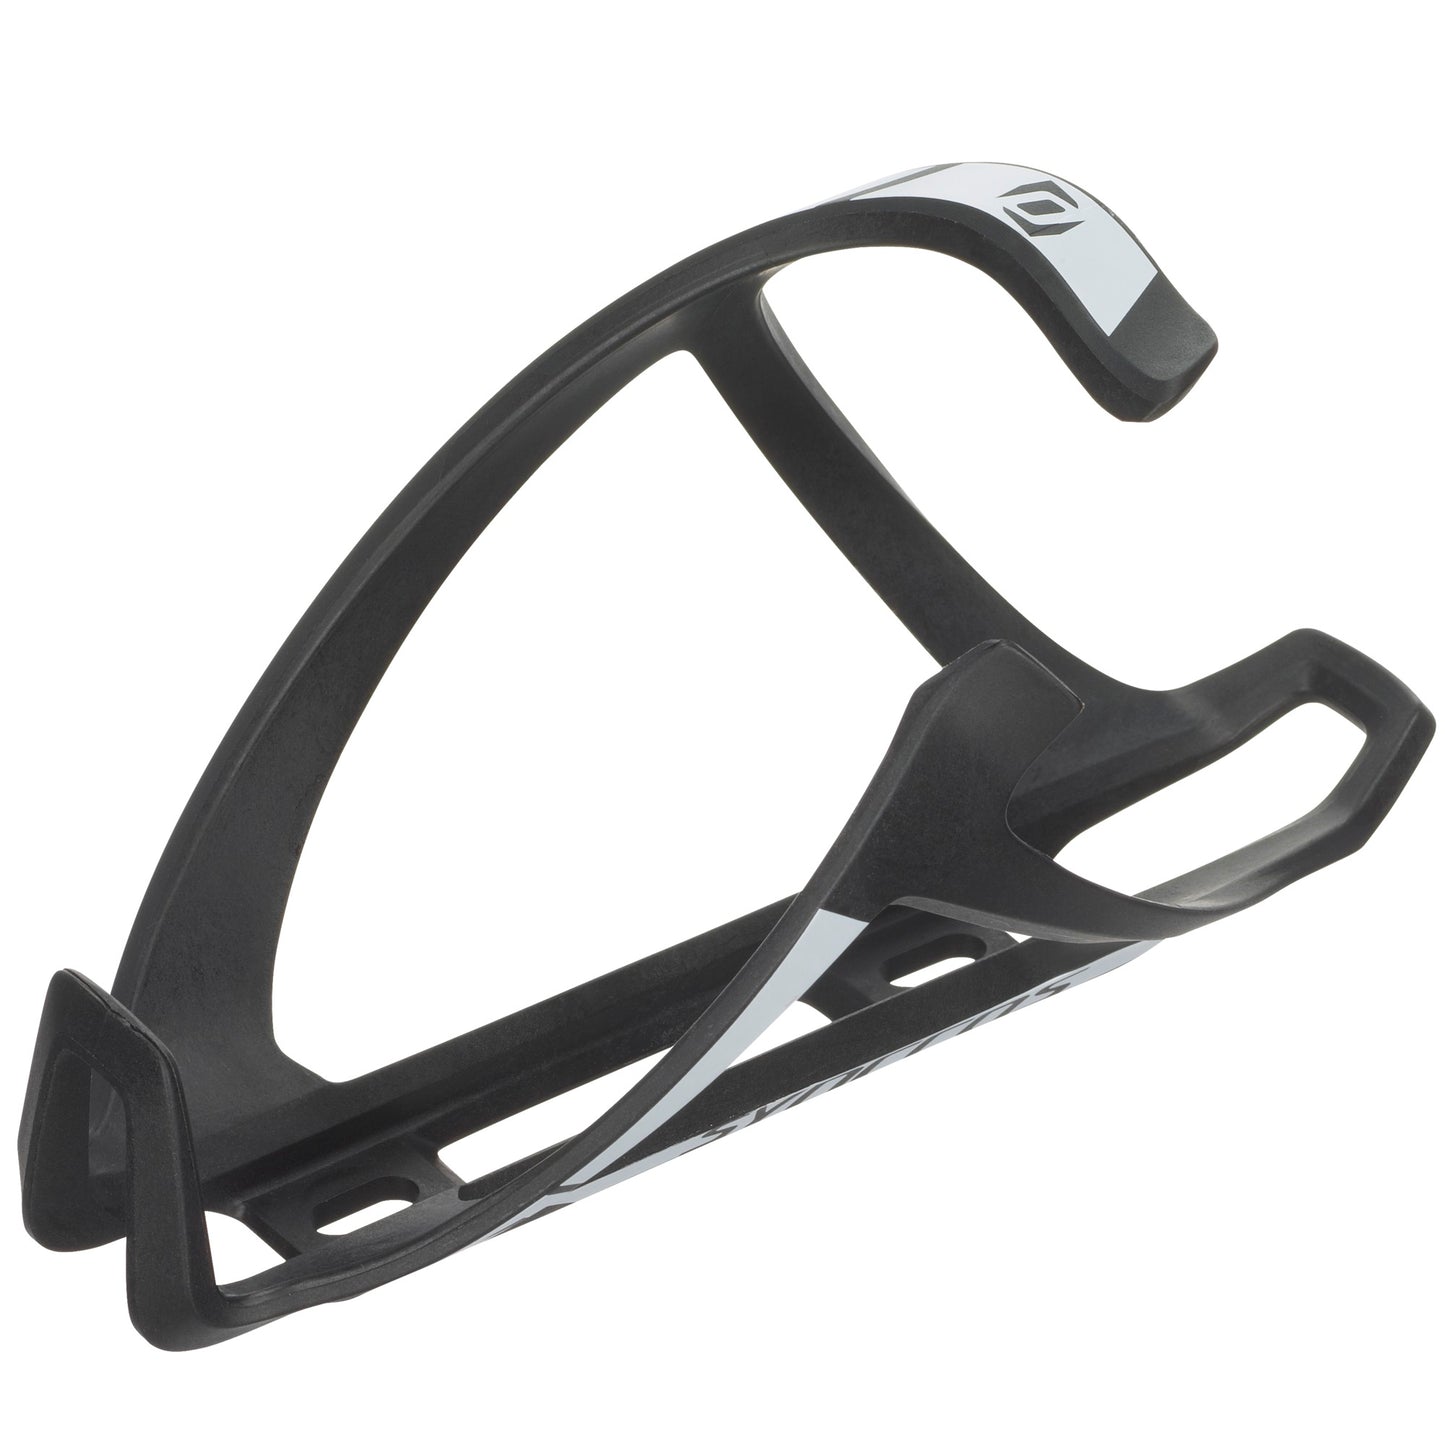 Syncros Bottle Cage Tailor cage 2.0 R.